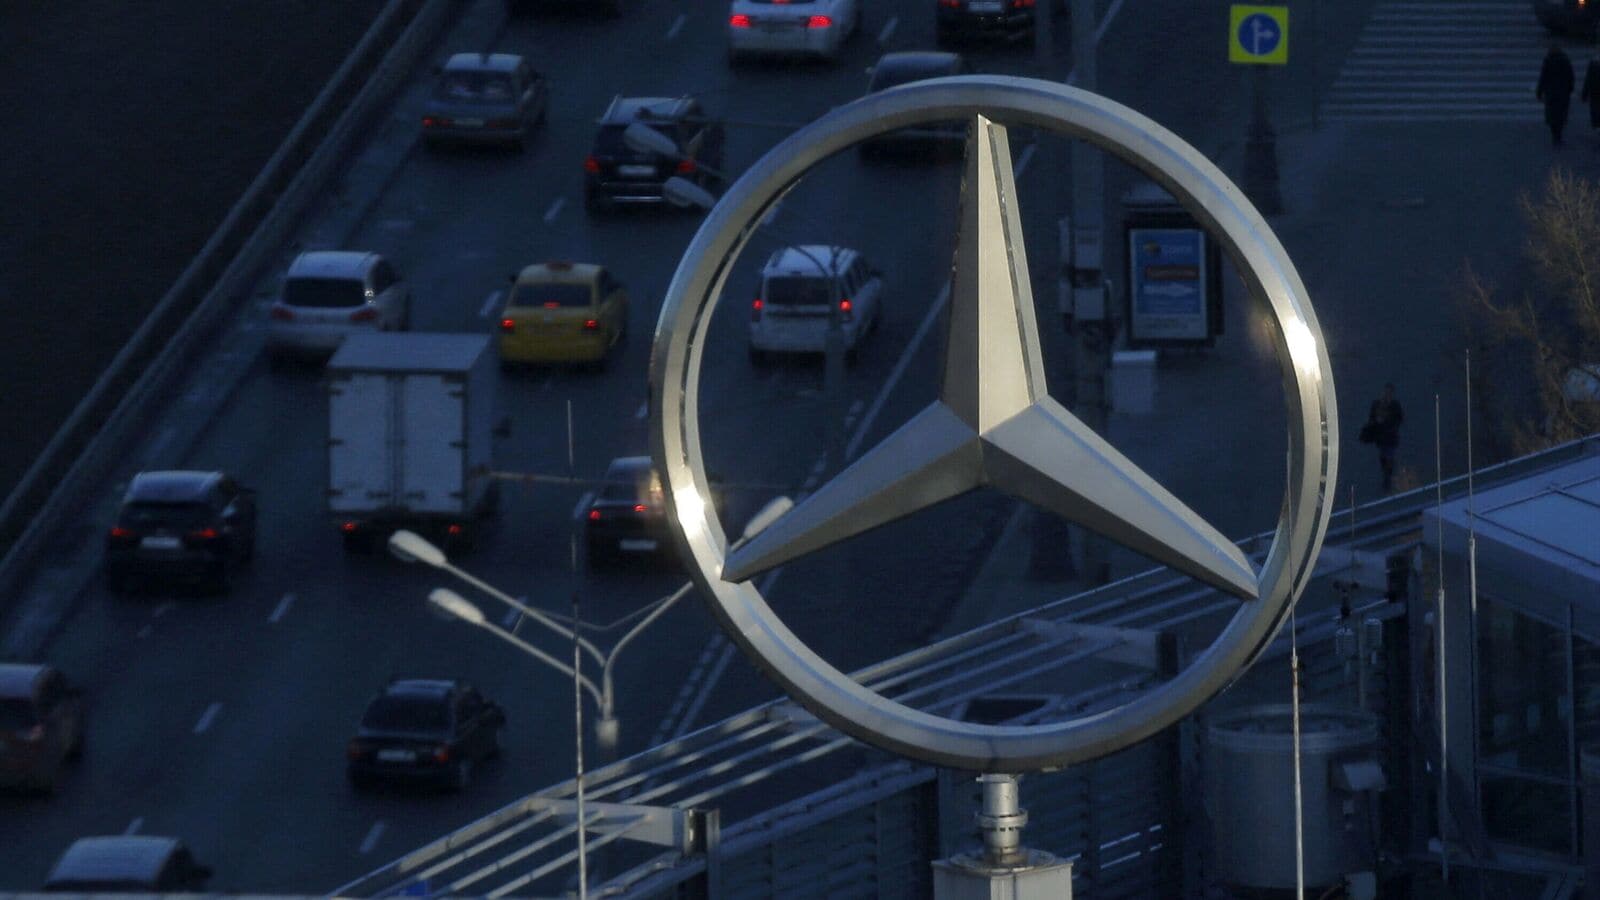 Mercedes-Benz accused of using emission cheating devices, likely to recall cars